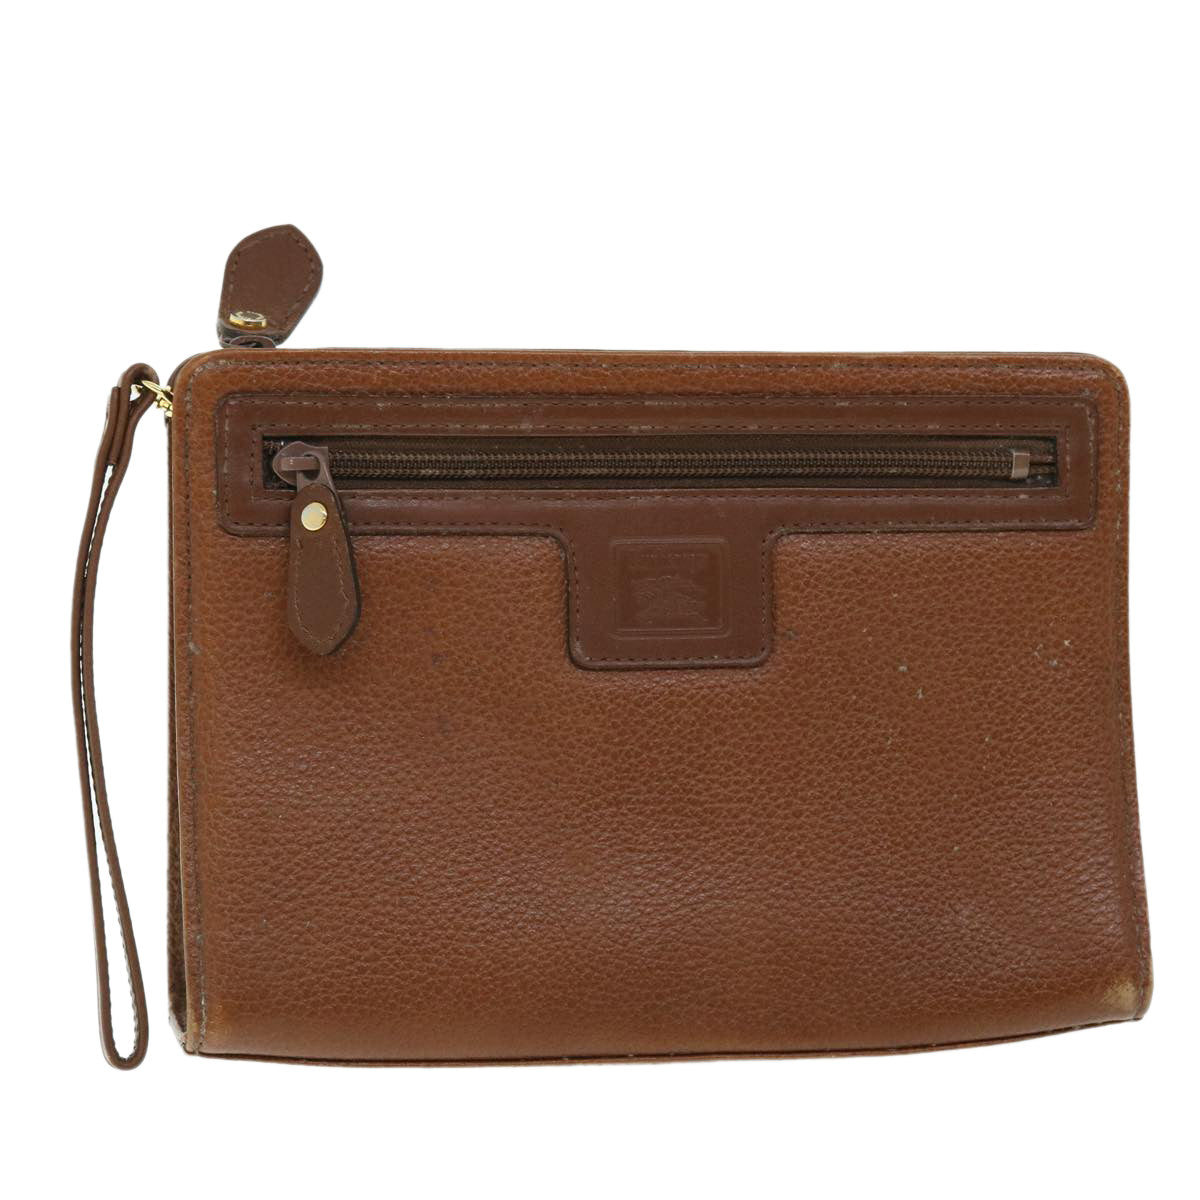 Burberrys Clutch Bag Leather Brown Auth 51663